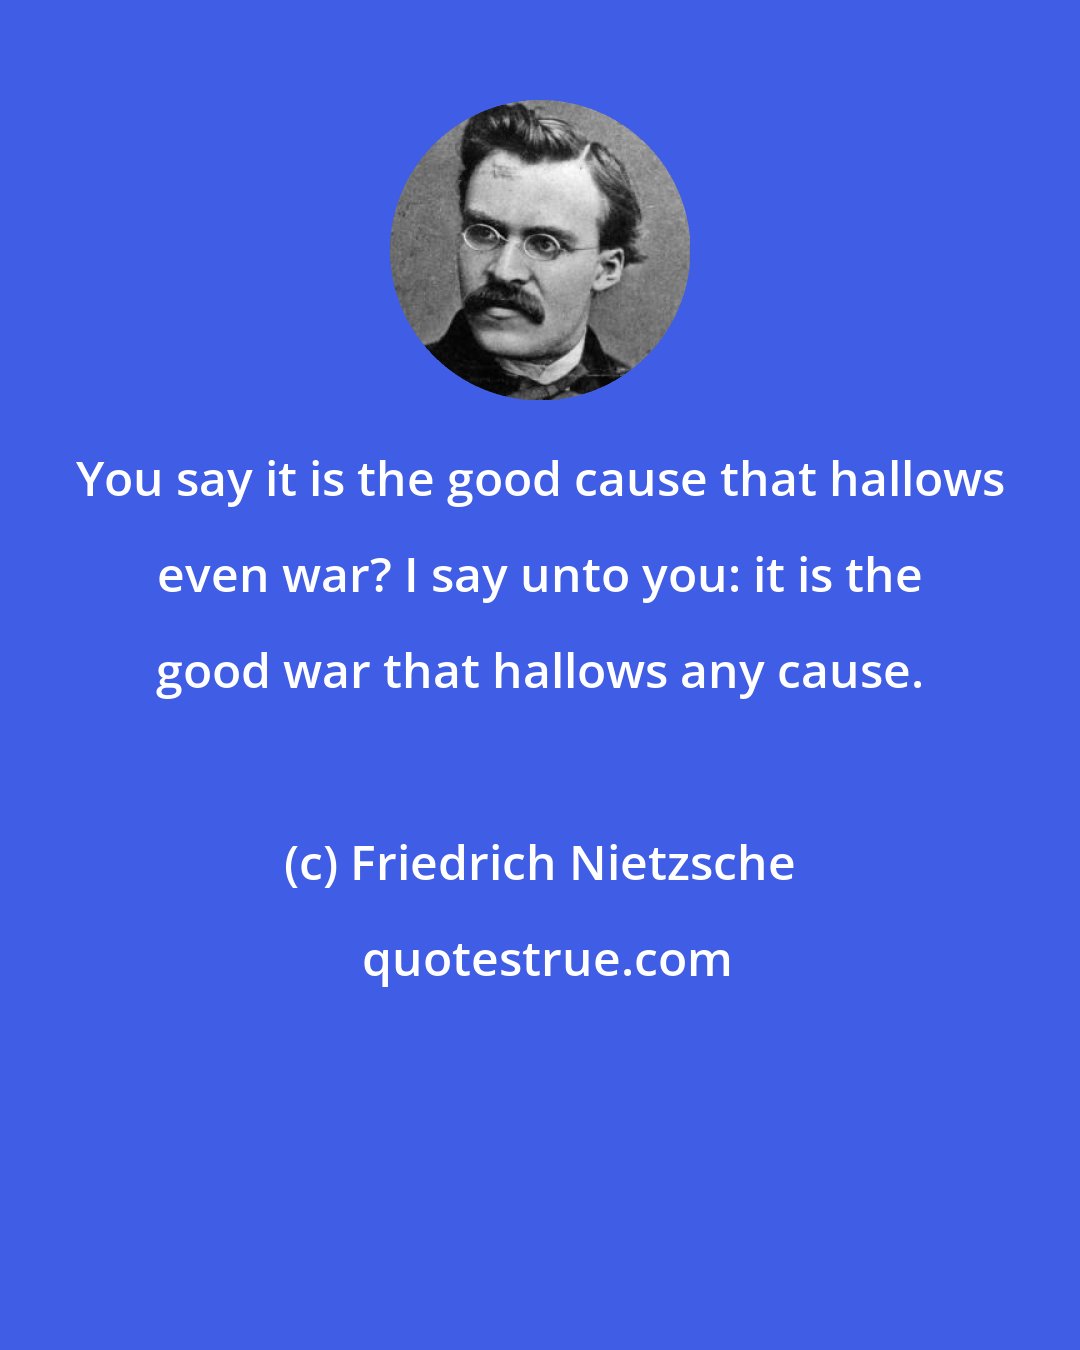 Friedrich Nietzsche: You say it is the good cause that hallows even war? I say unto you: it is the good war that hallows any cause.